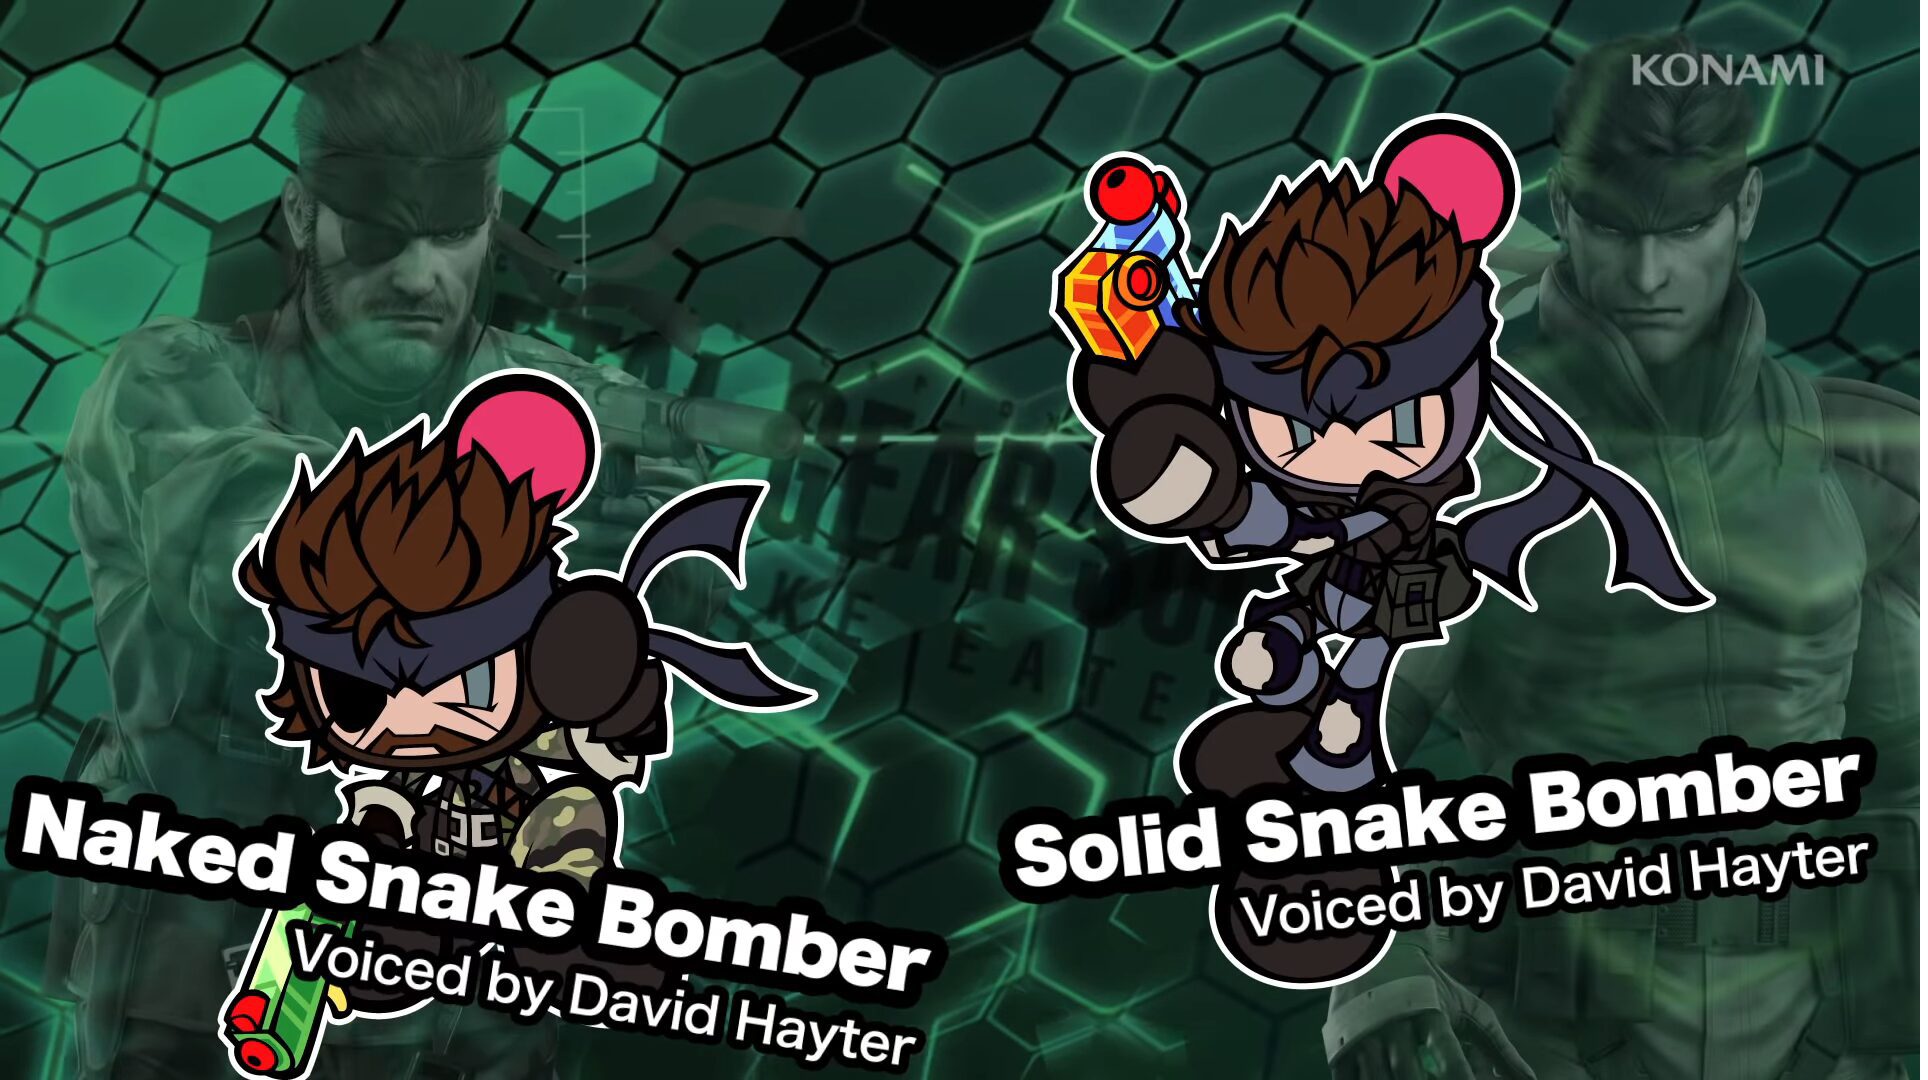 Super Bomberman R Adds Solid Snake, Liquid Snake and Raiden